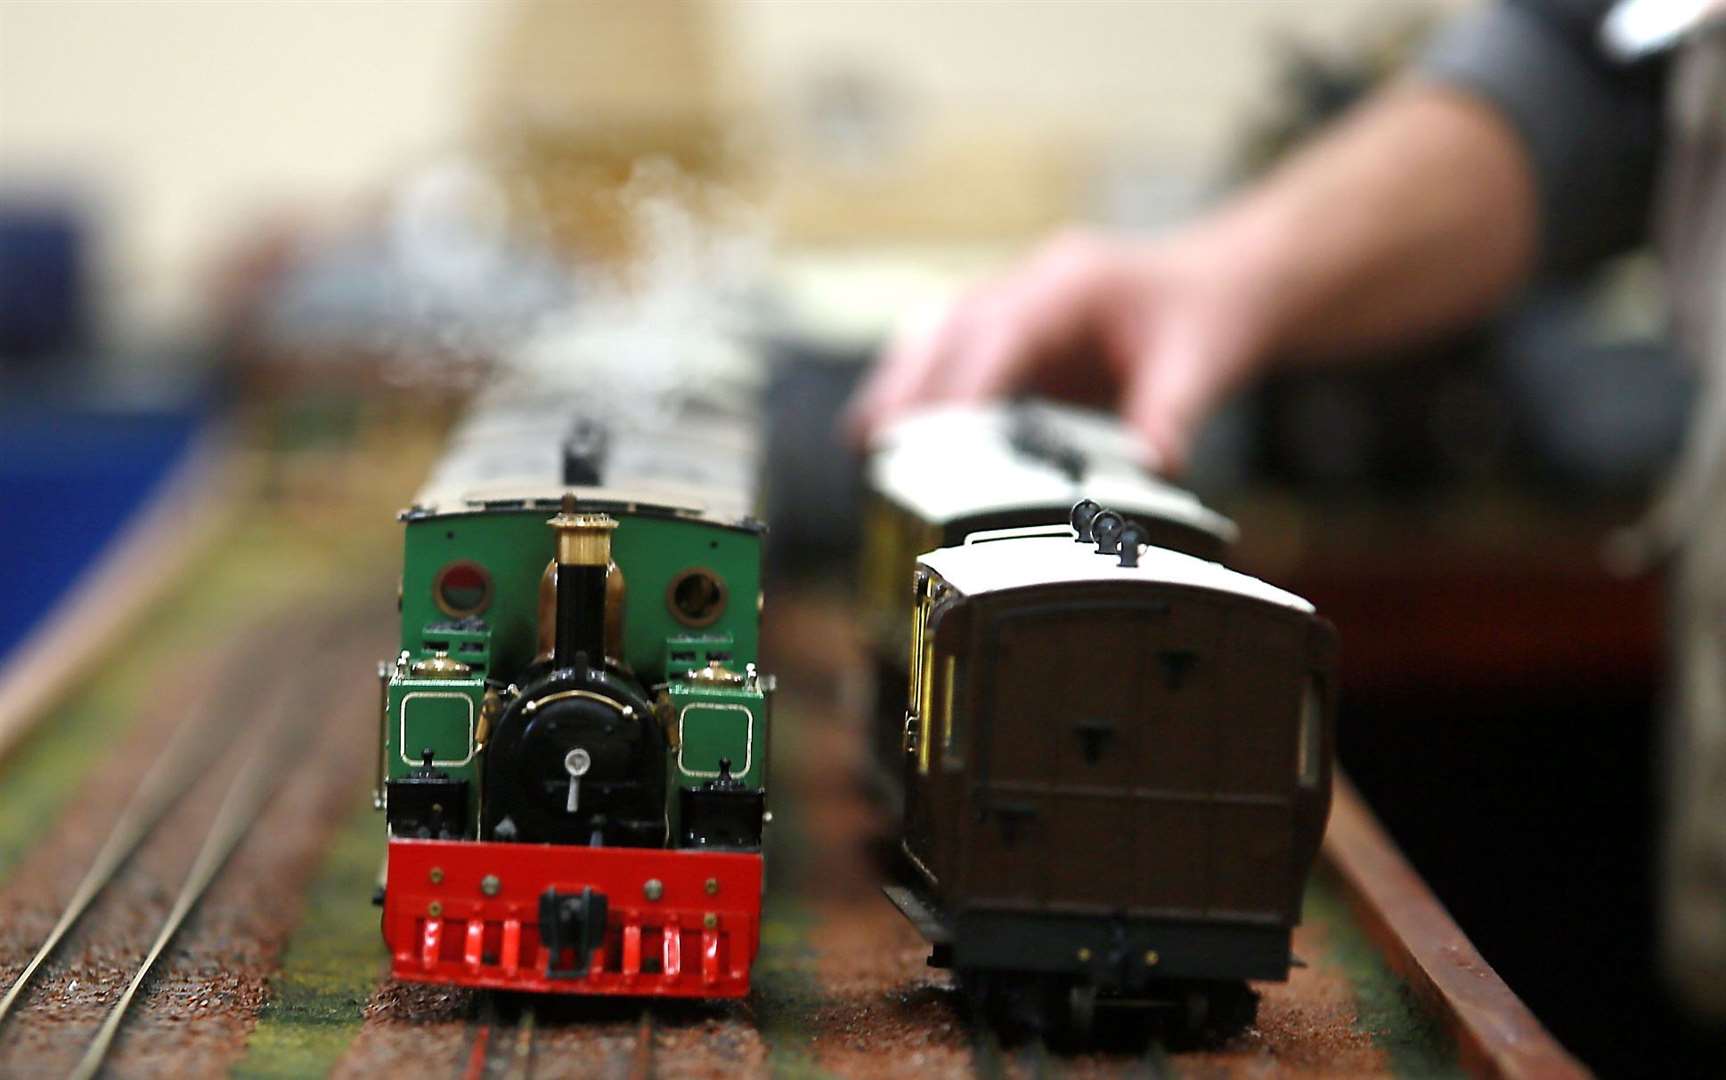 The Kent Area Group of the G Scale model railway society will hold a show in Teynham